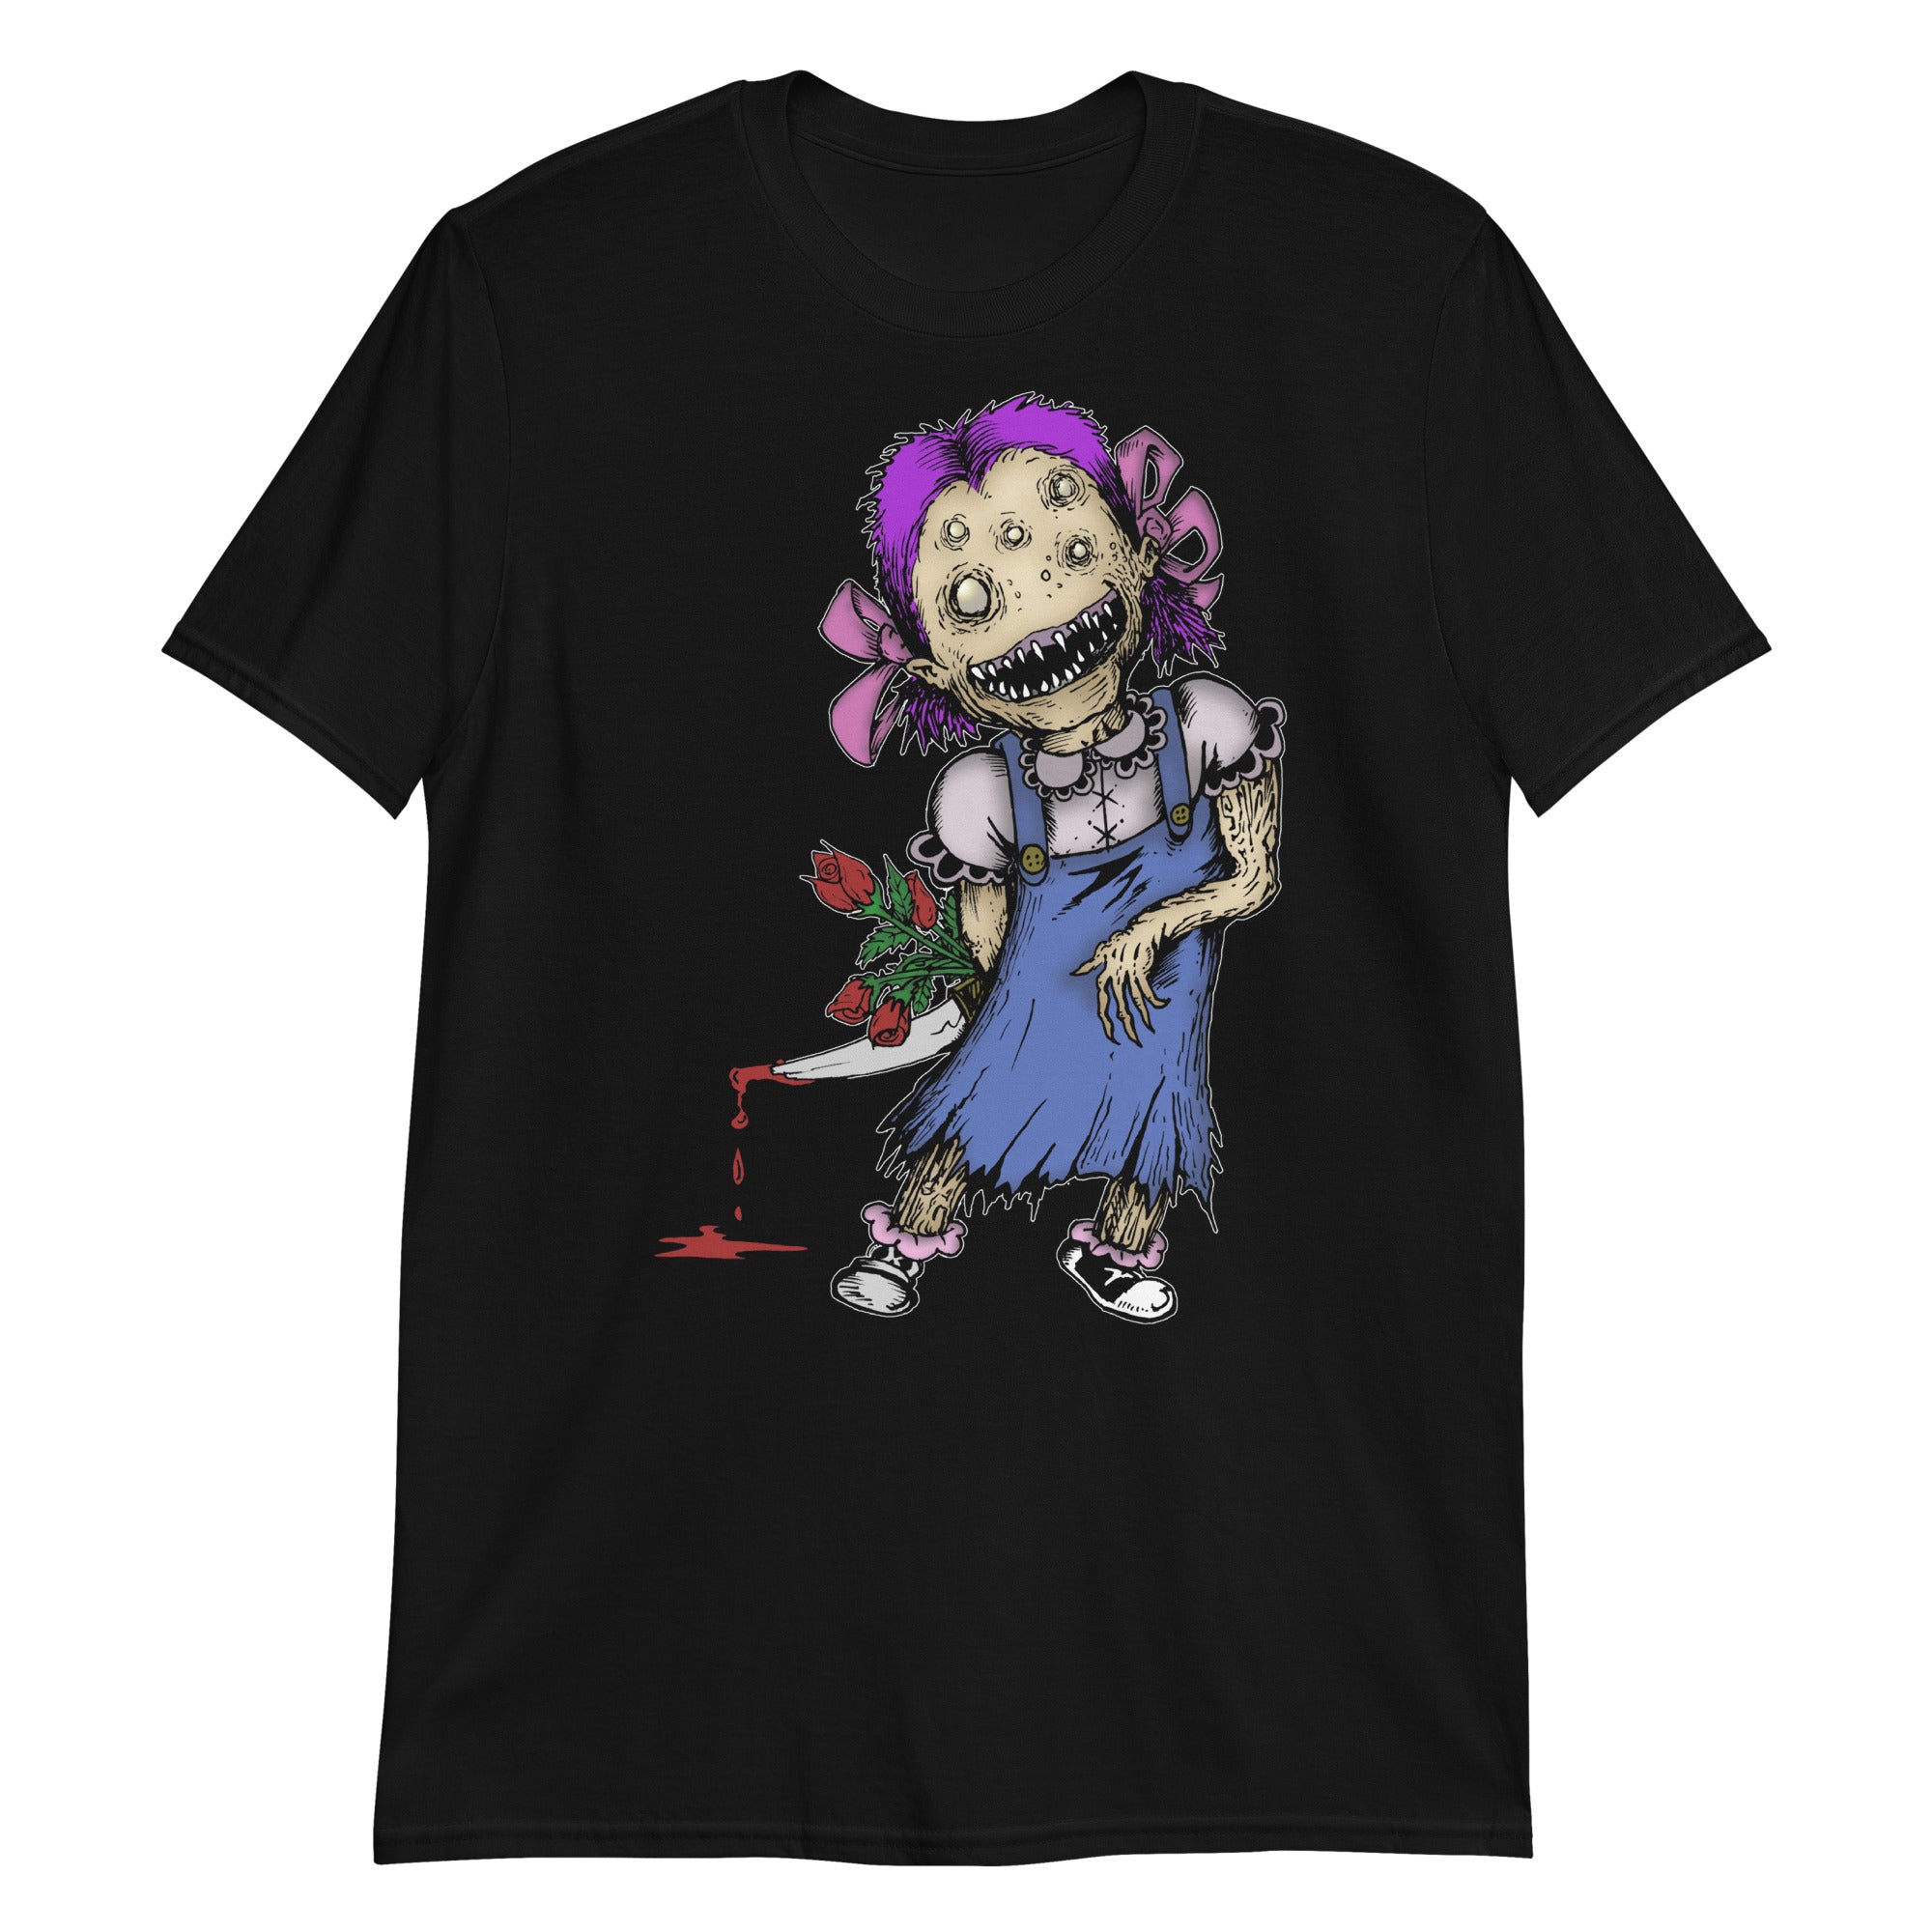 Wicked Little Girl with Bloody Knife Horror Style Men's Short Sleeve T-Shirt - Edge of Life Designs